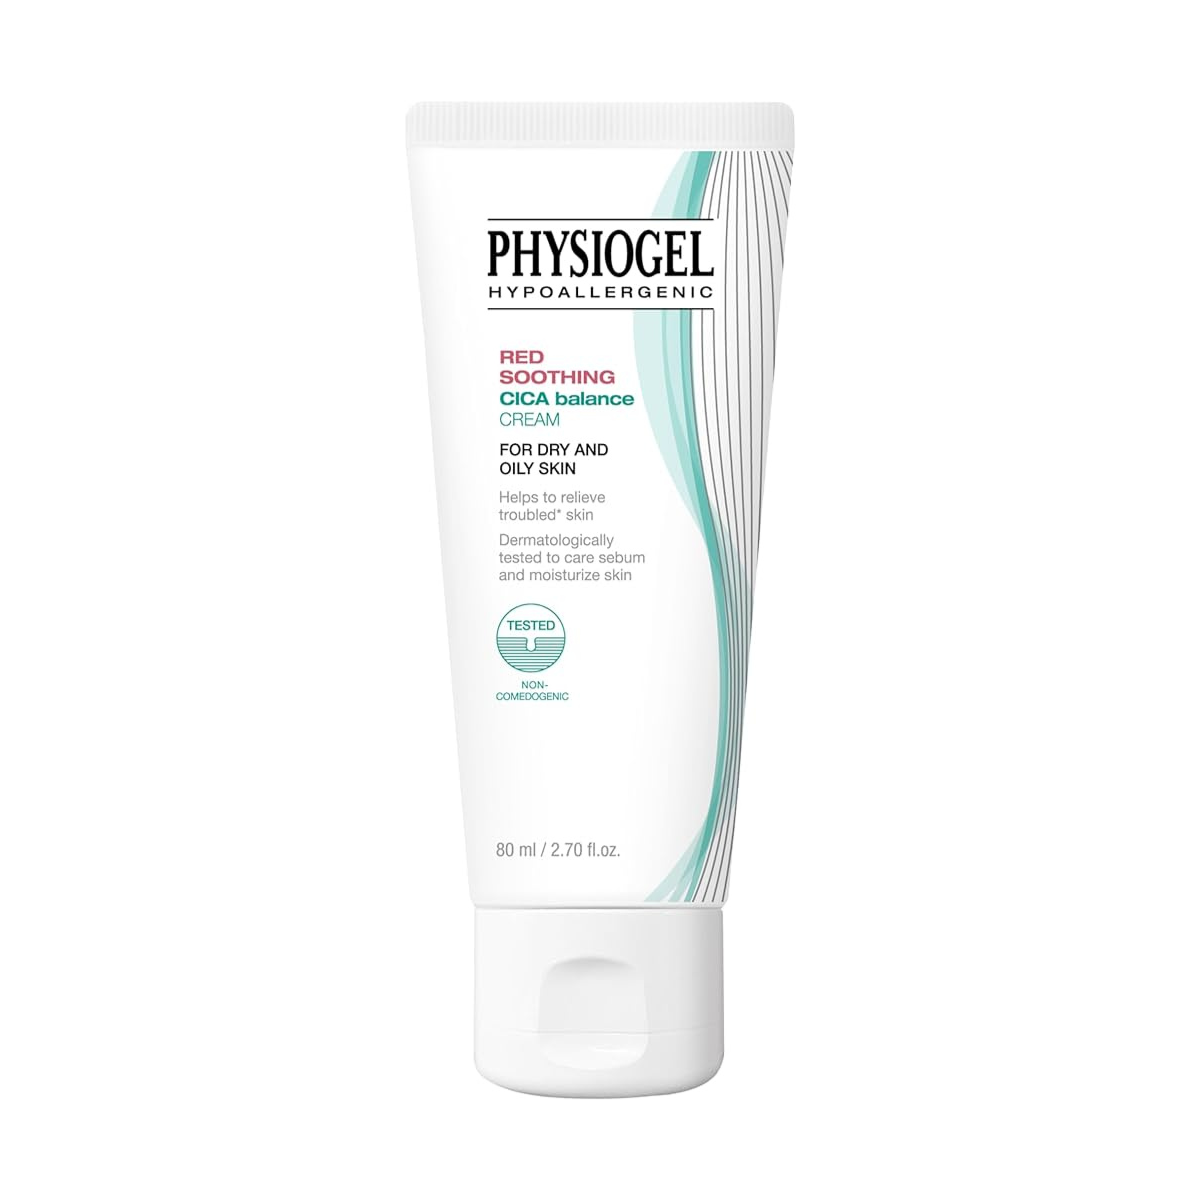 PHYSIOGEL Red Soothing Cica Balance Cream 80ml - DODOSKIN